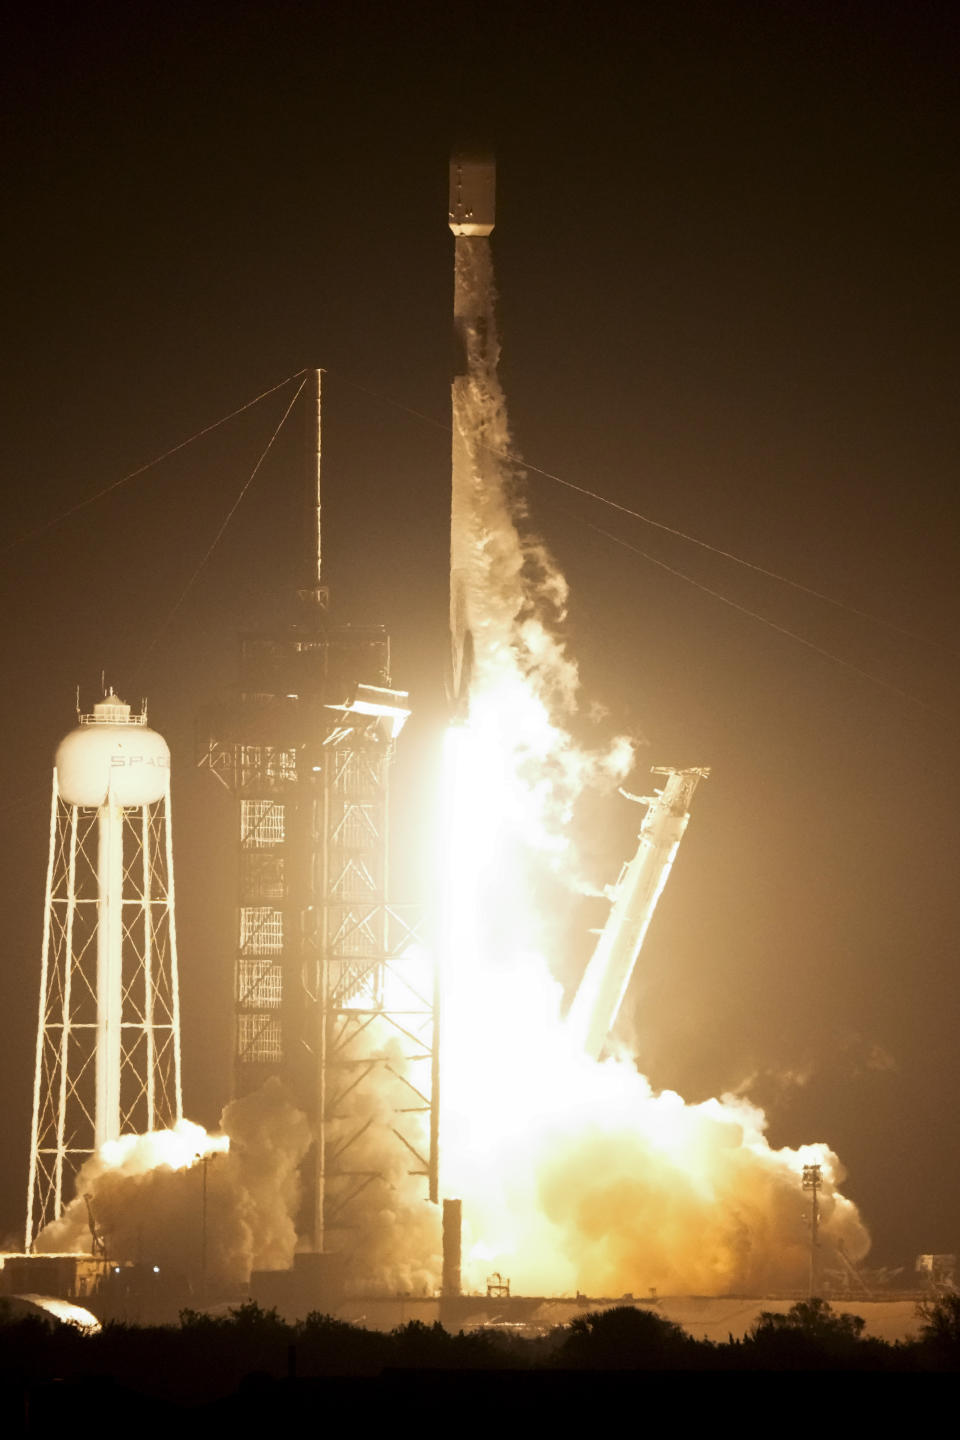 A SpaceX Falcon 9 rocket lifts off from pad 39A at Kennedy Space Center in Cape Canaveral, Fla., Thursday, Feb. 15, 2024. The rocket carried Intuitive Machines’ lunar lander on its way to the moon. If all goes well, a touchdown attempt would occur Feb. 22, after a day in lunar orbit. (AP Photo/John Raoux)